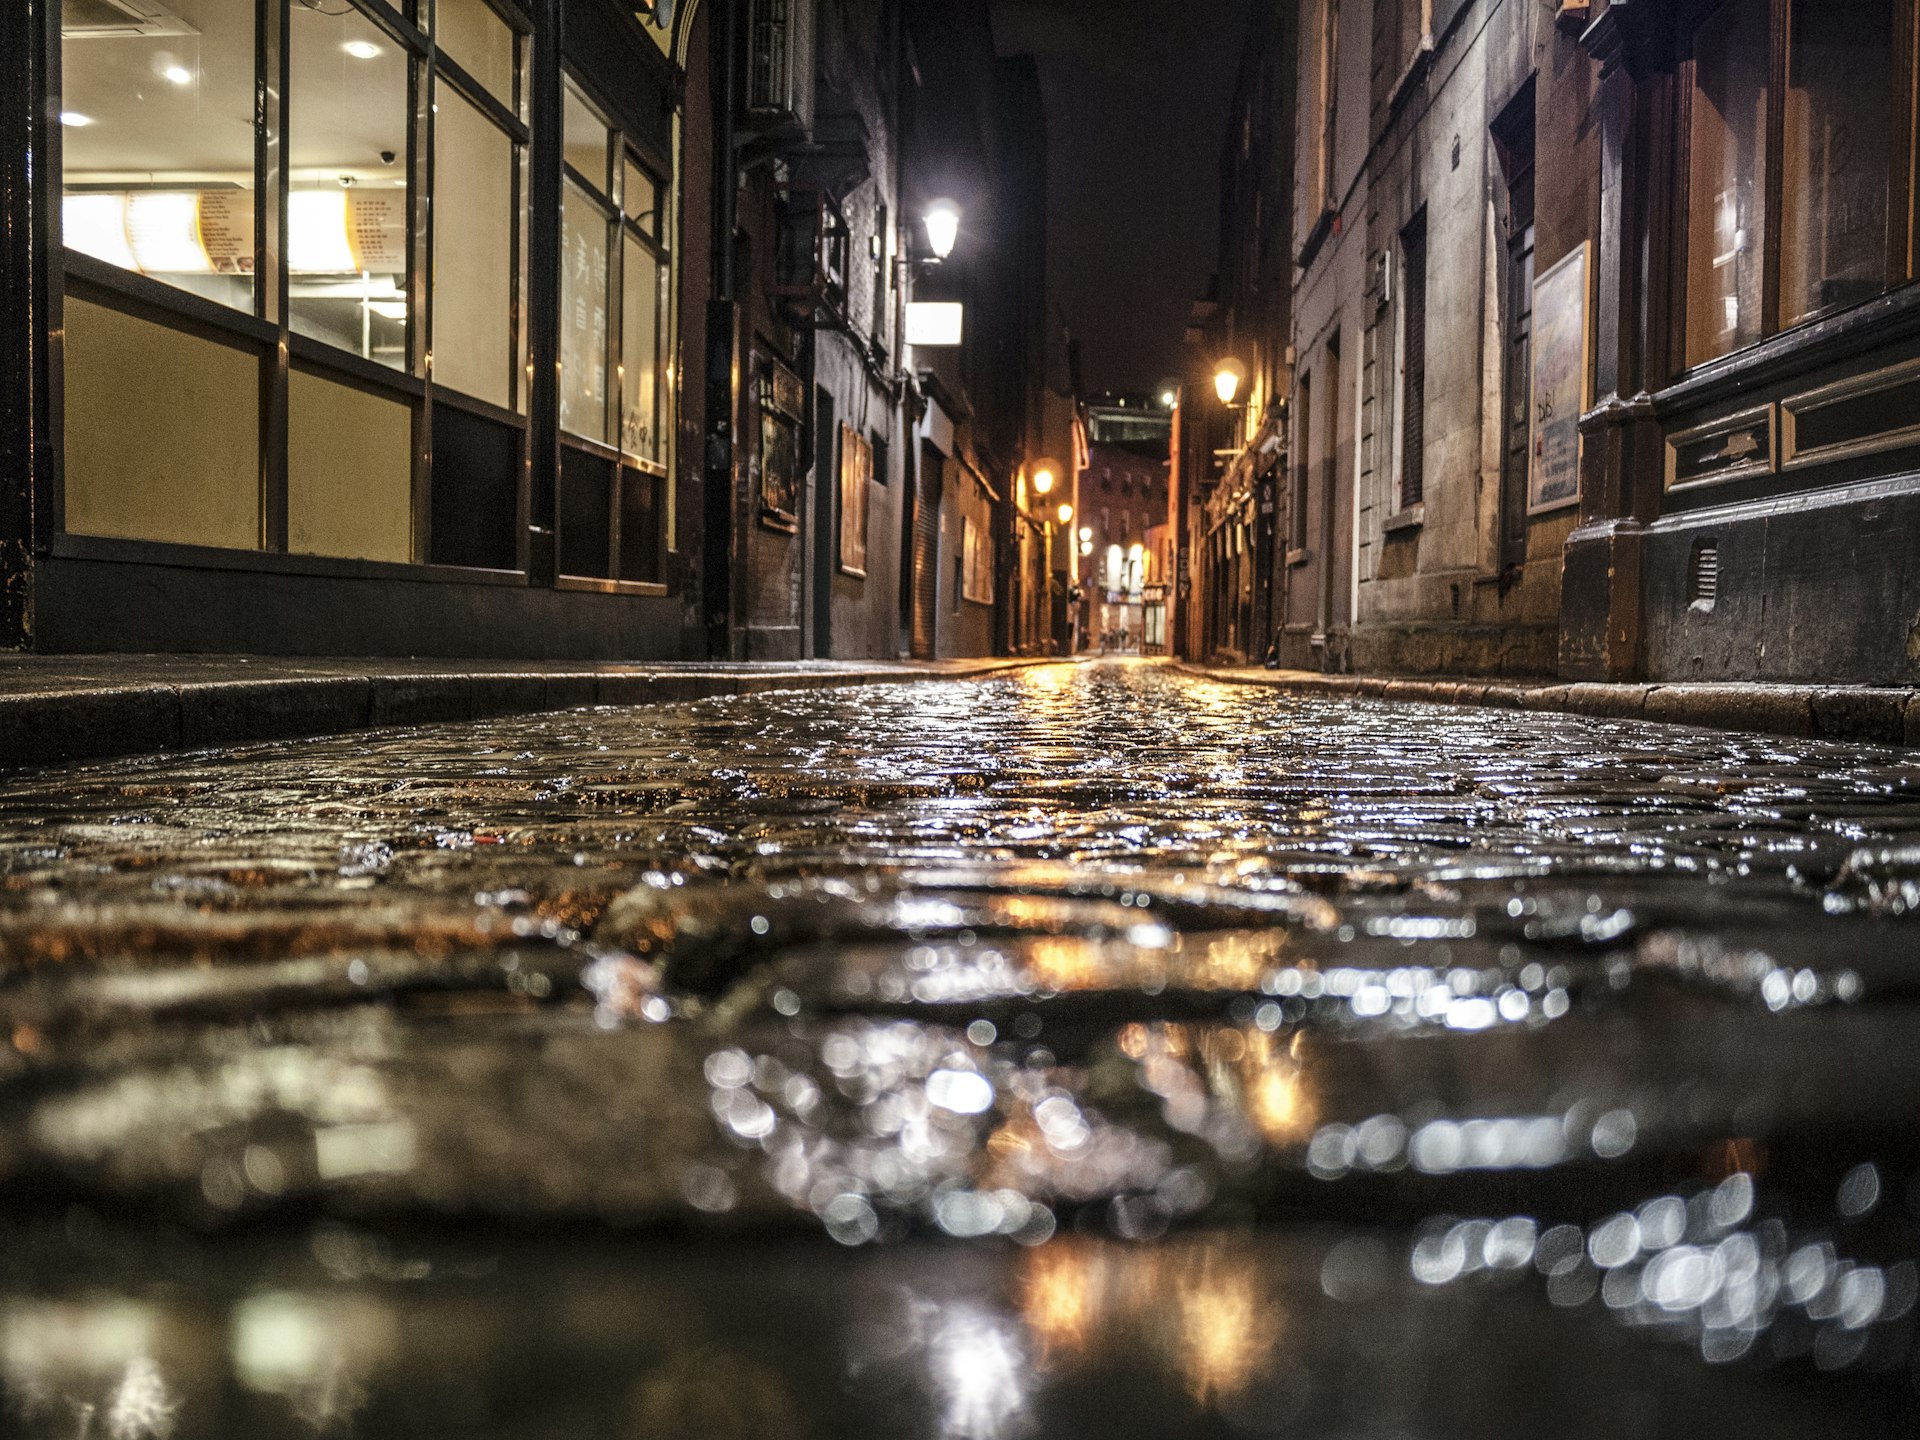 An empty dark cobbled alley shot from ground level at night